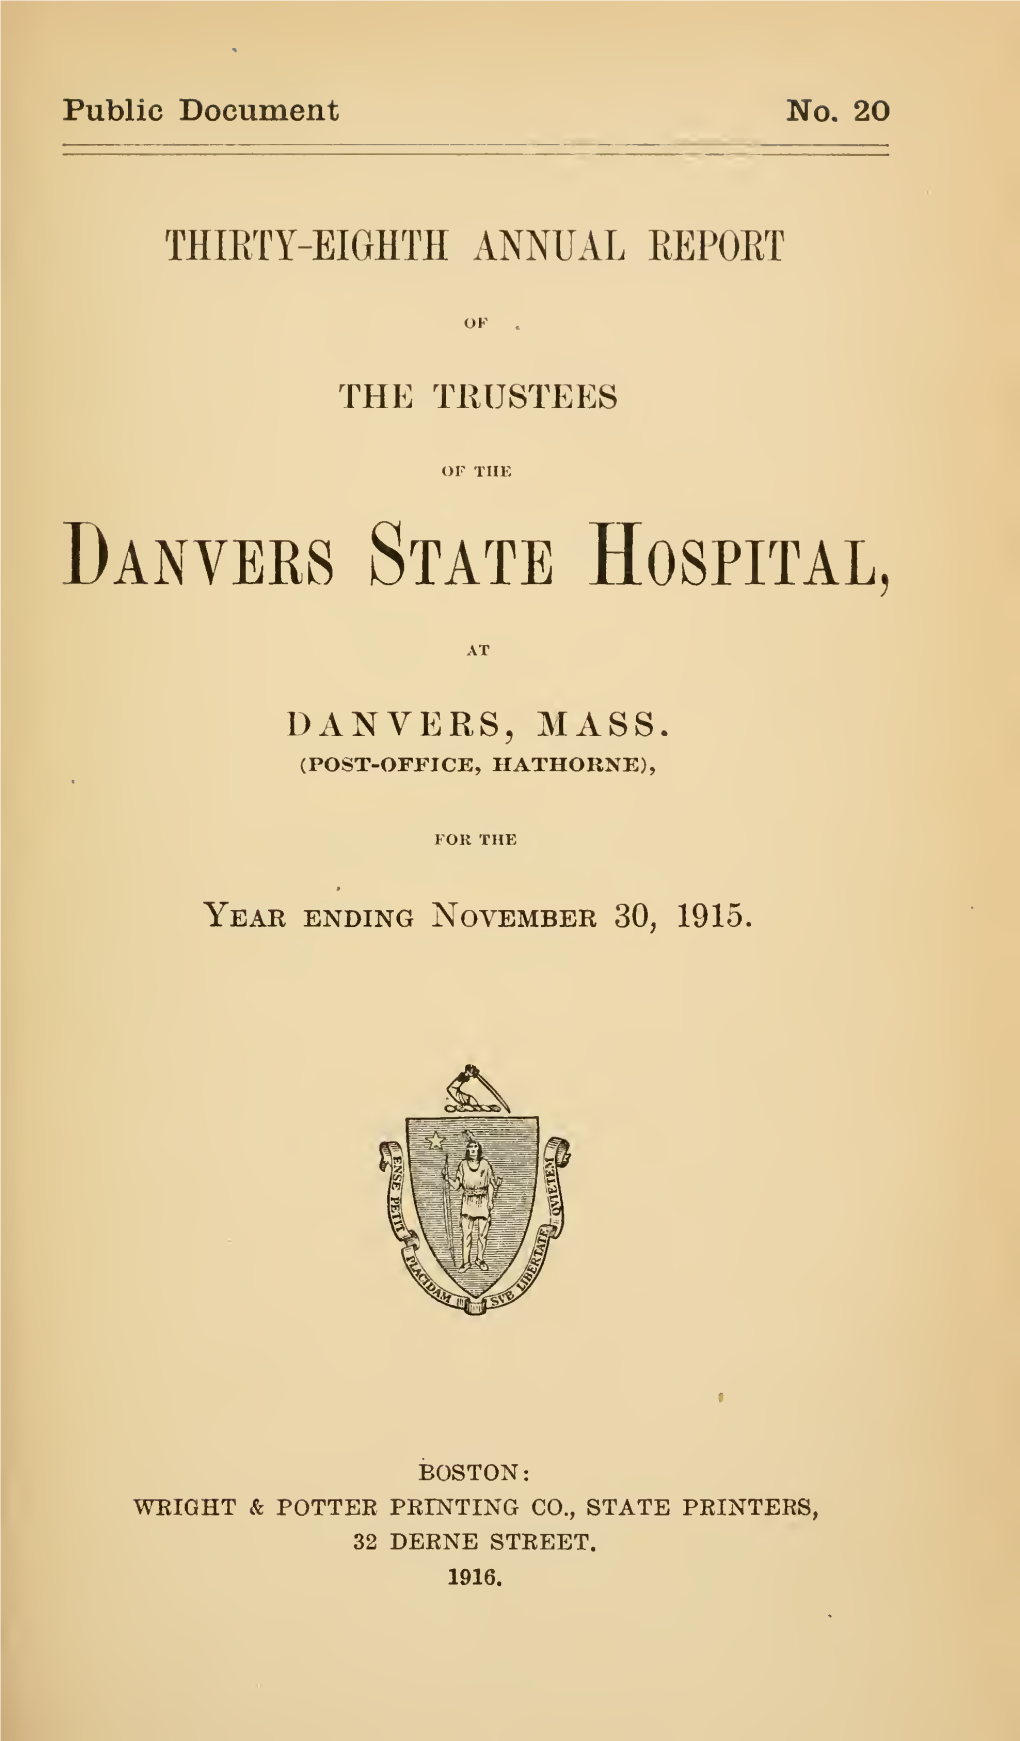 Annual Report of the Trustees of the Danvers State Hospital